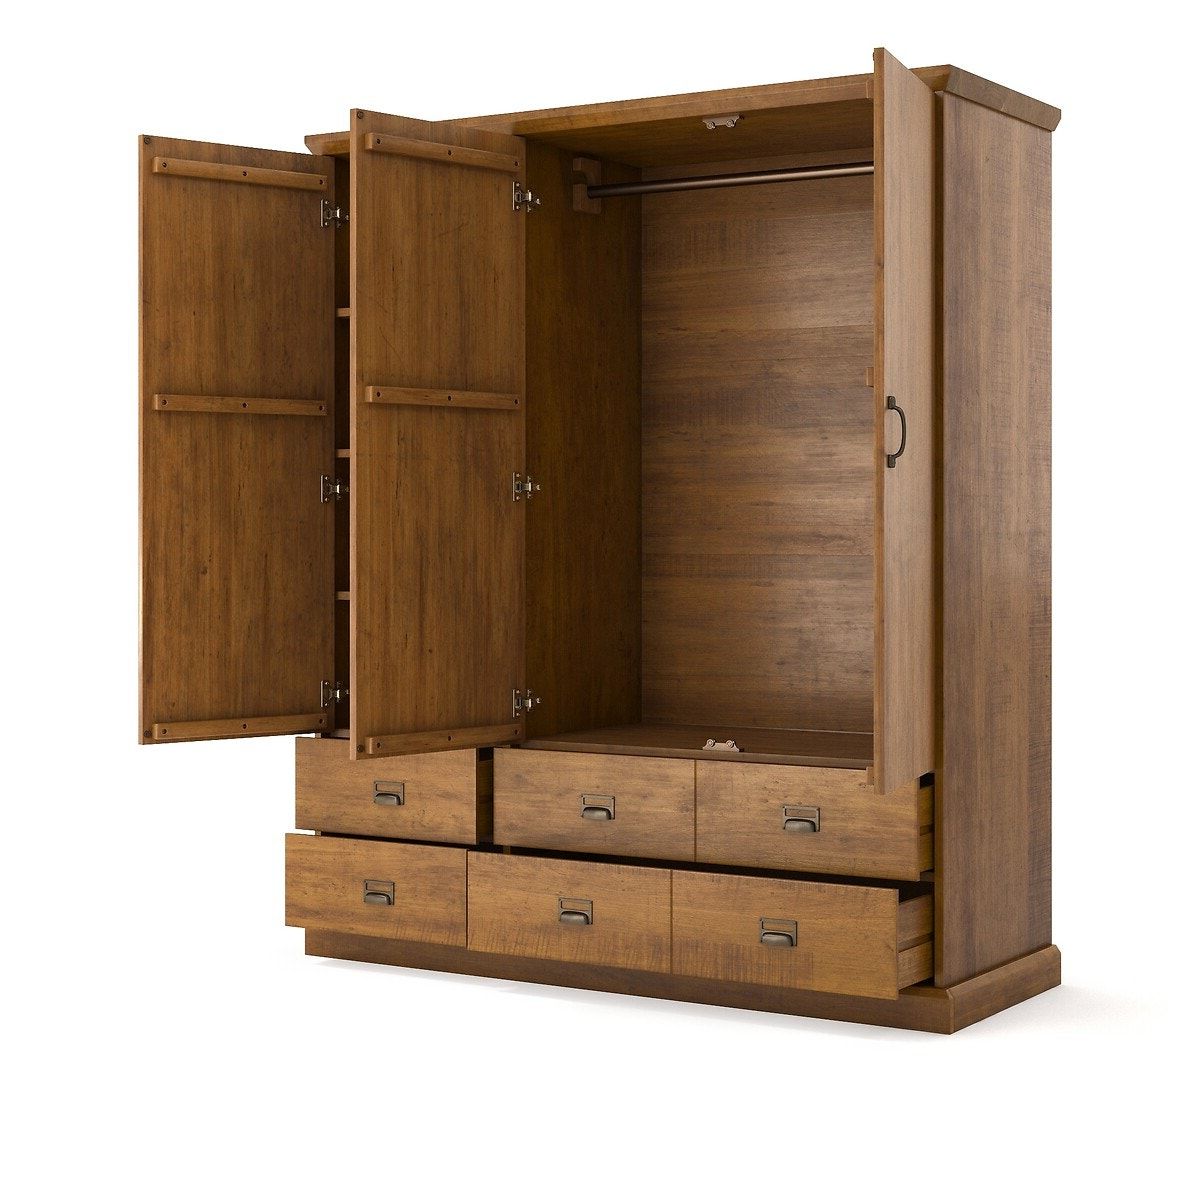 Lindley Triple 4 Drawer Pine Wardrobe, Dark Oak Wood, La Redoute Interieurs  | La Redoute With Regard To Pine Wardrobes With Drawers And Shelves (Gallery 14 of 20)